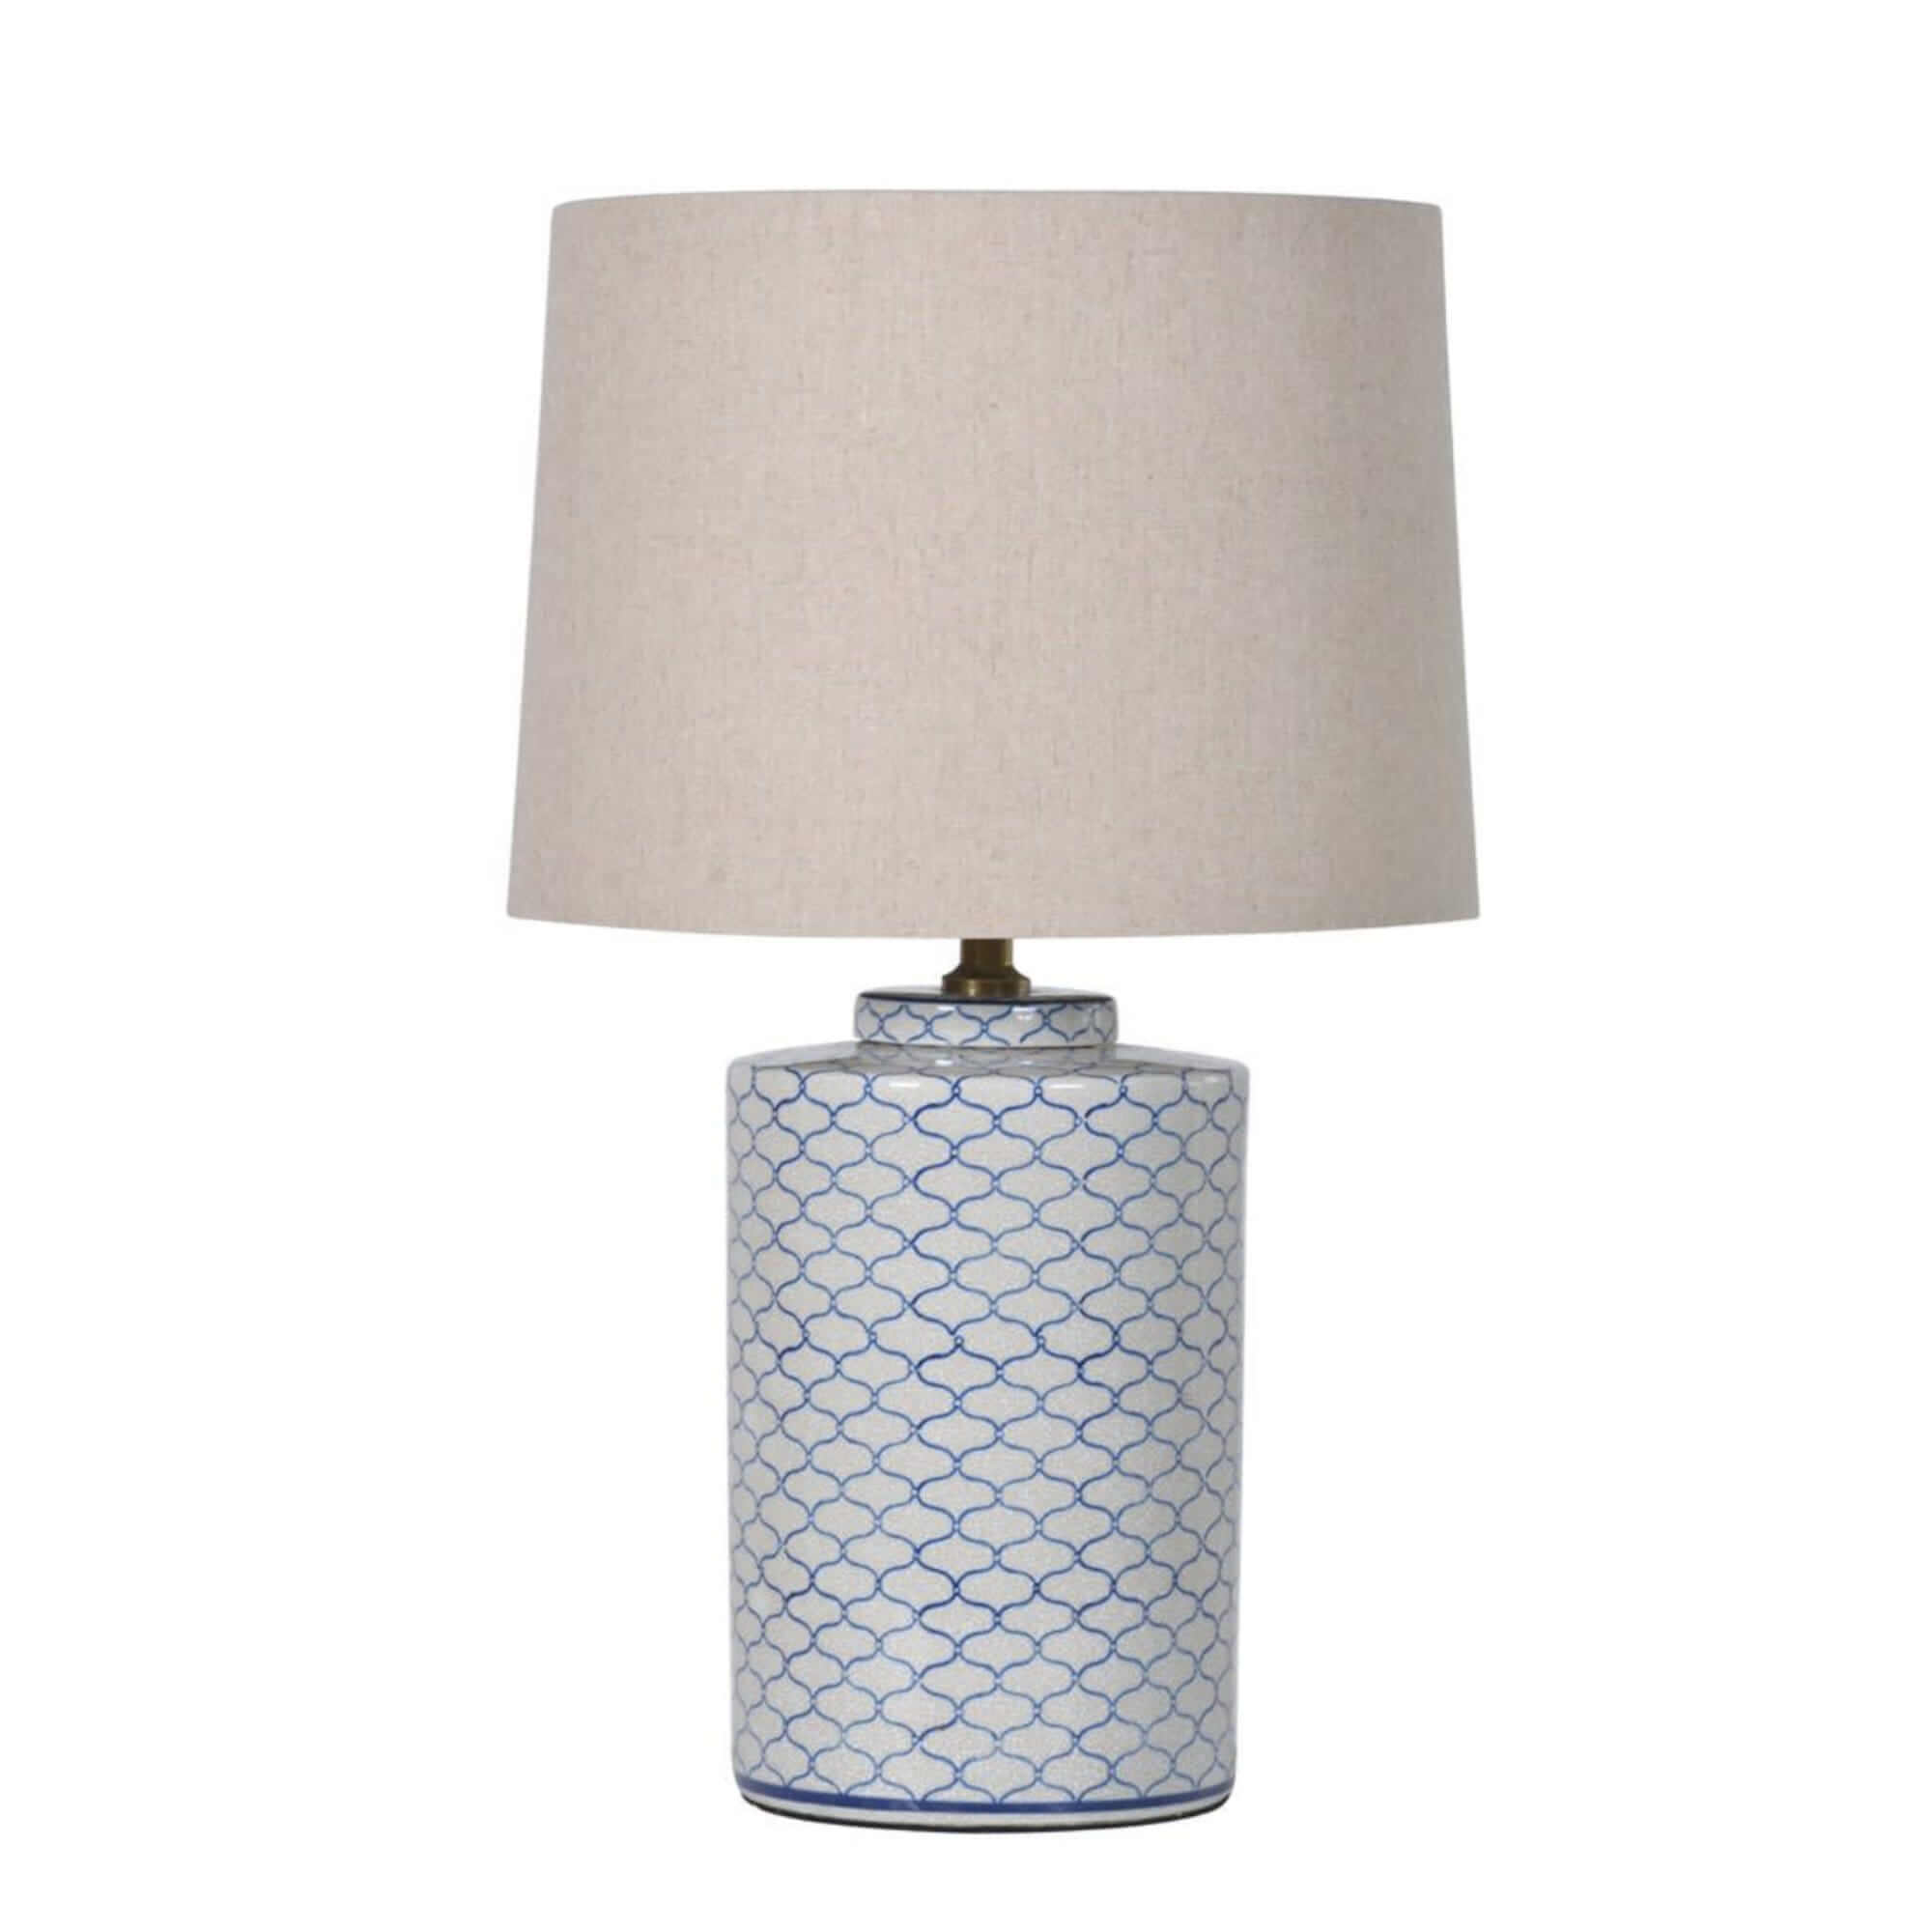 Crackle Glaze Lamp With Shade - escapologyhome.co.uk